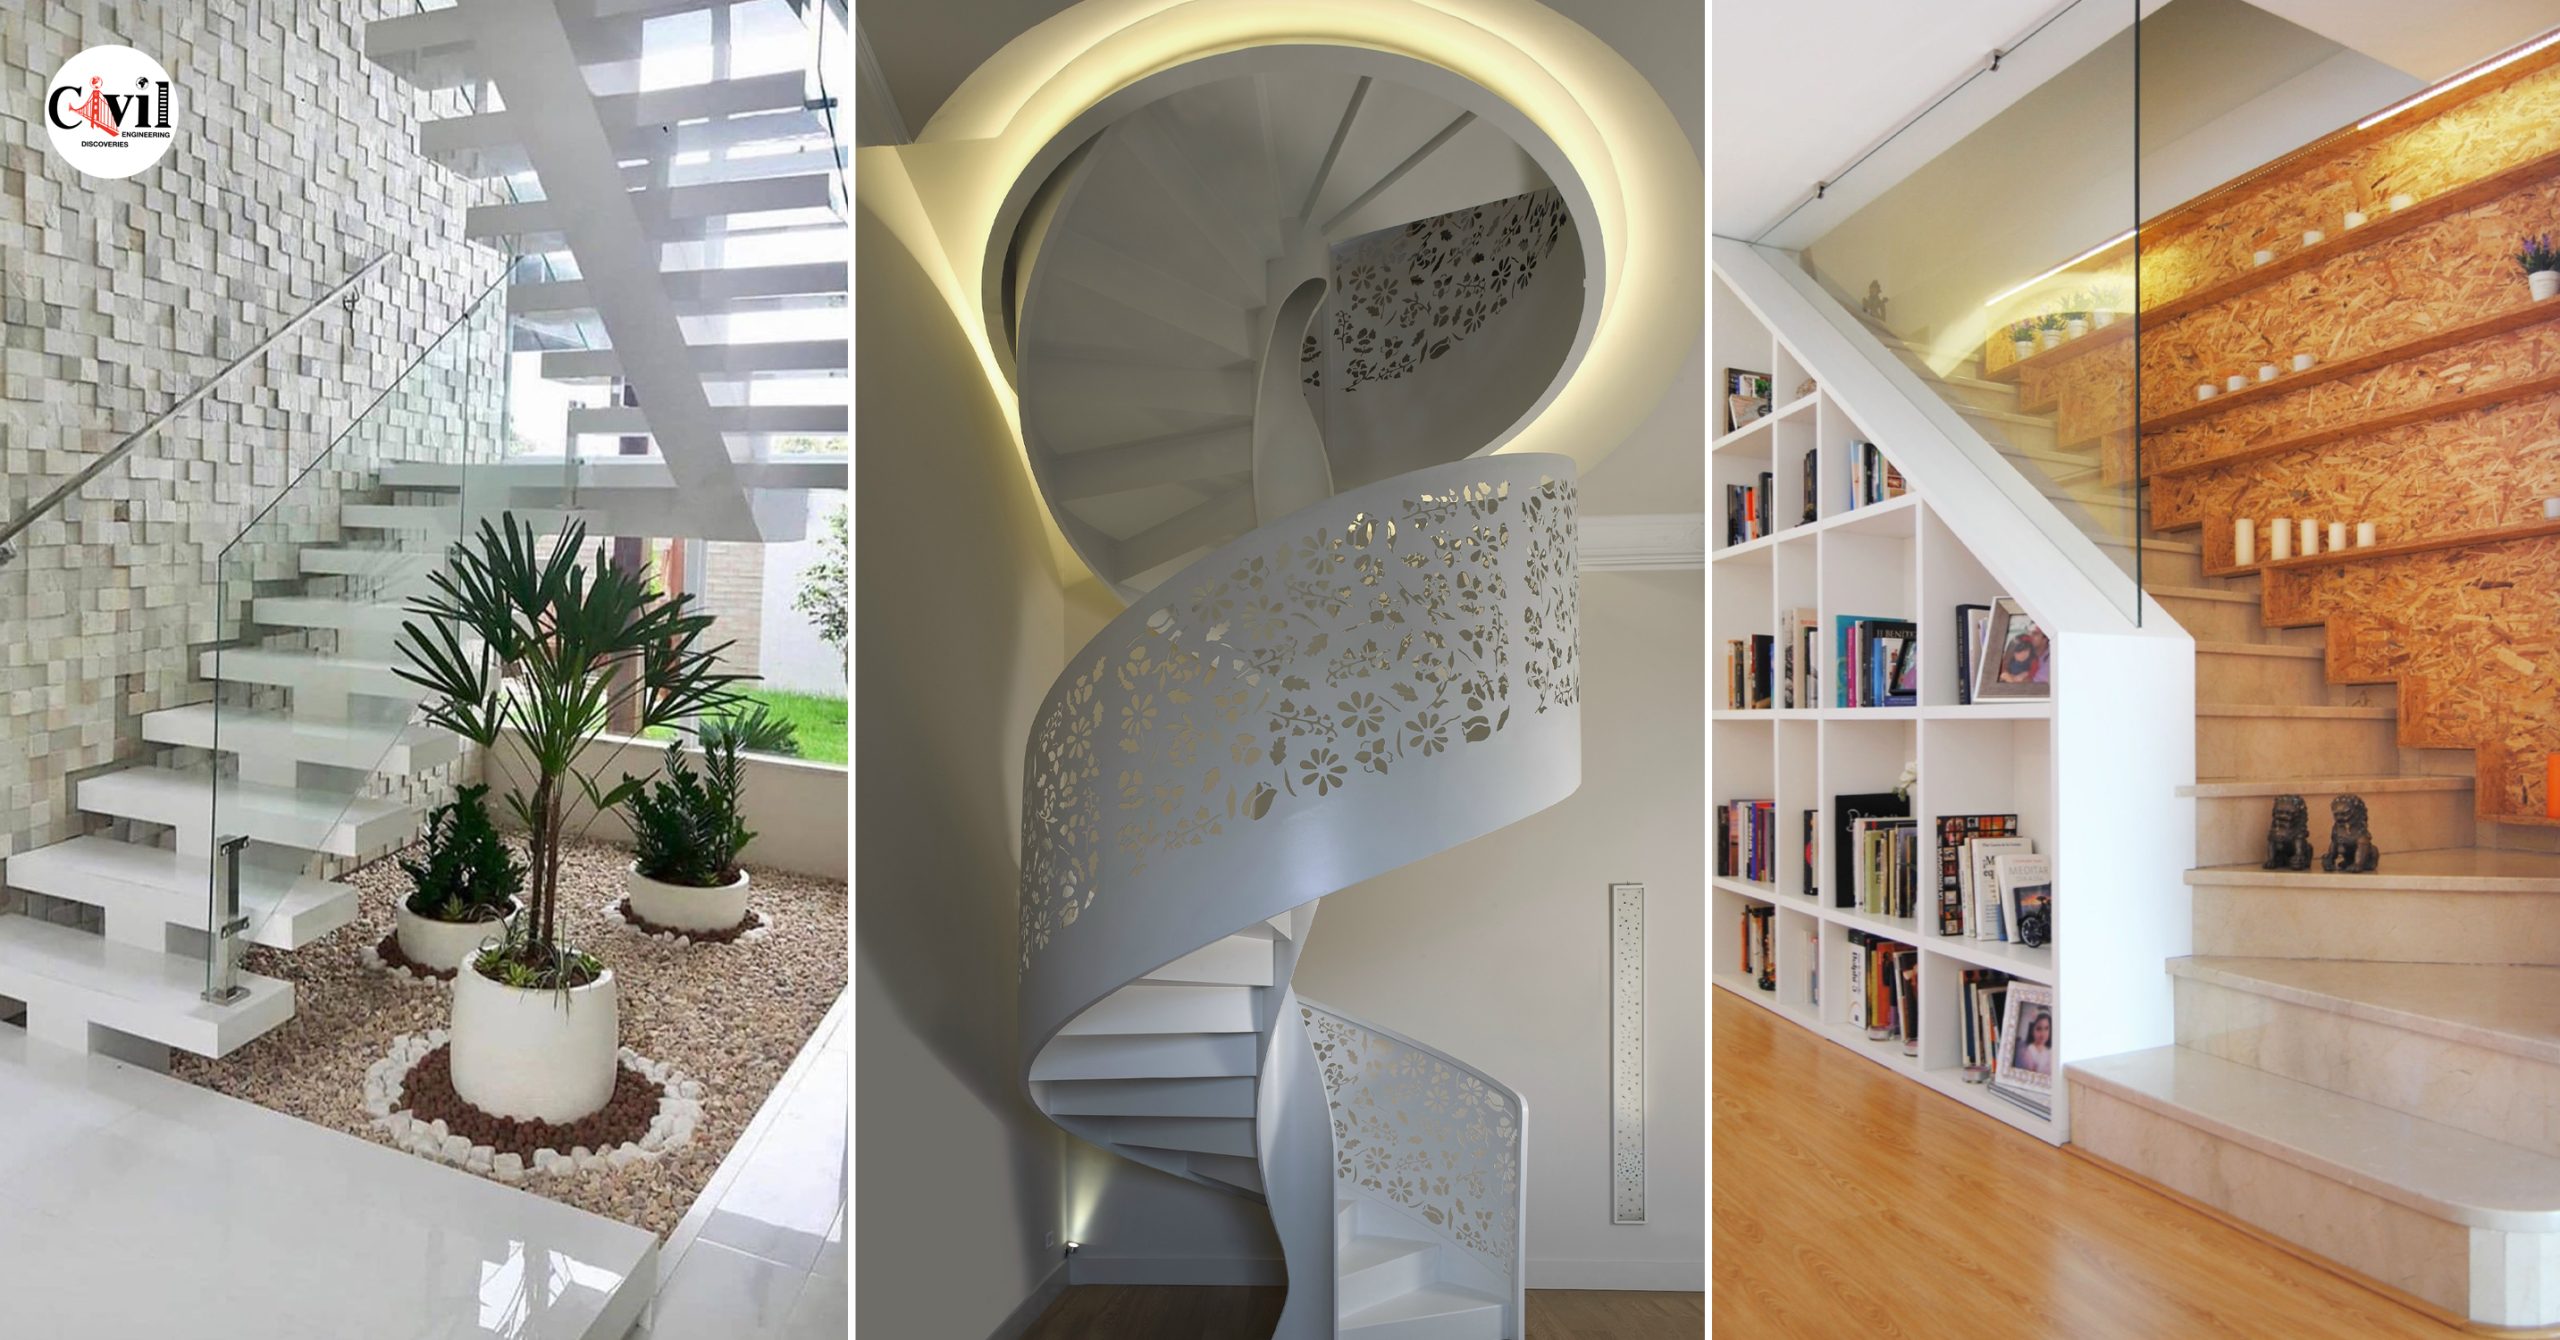 Interior Banister: Transform Your Home with Stunning Designs